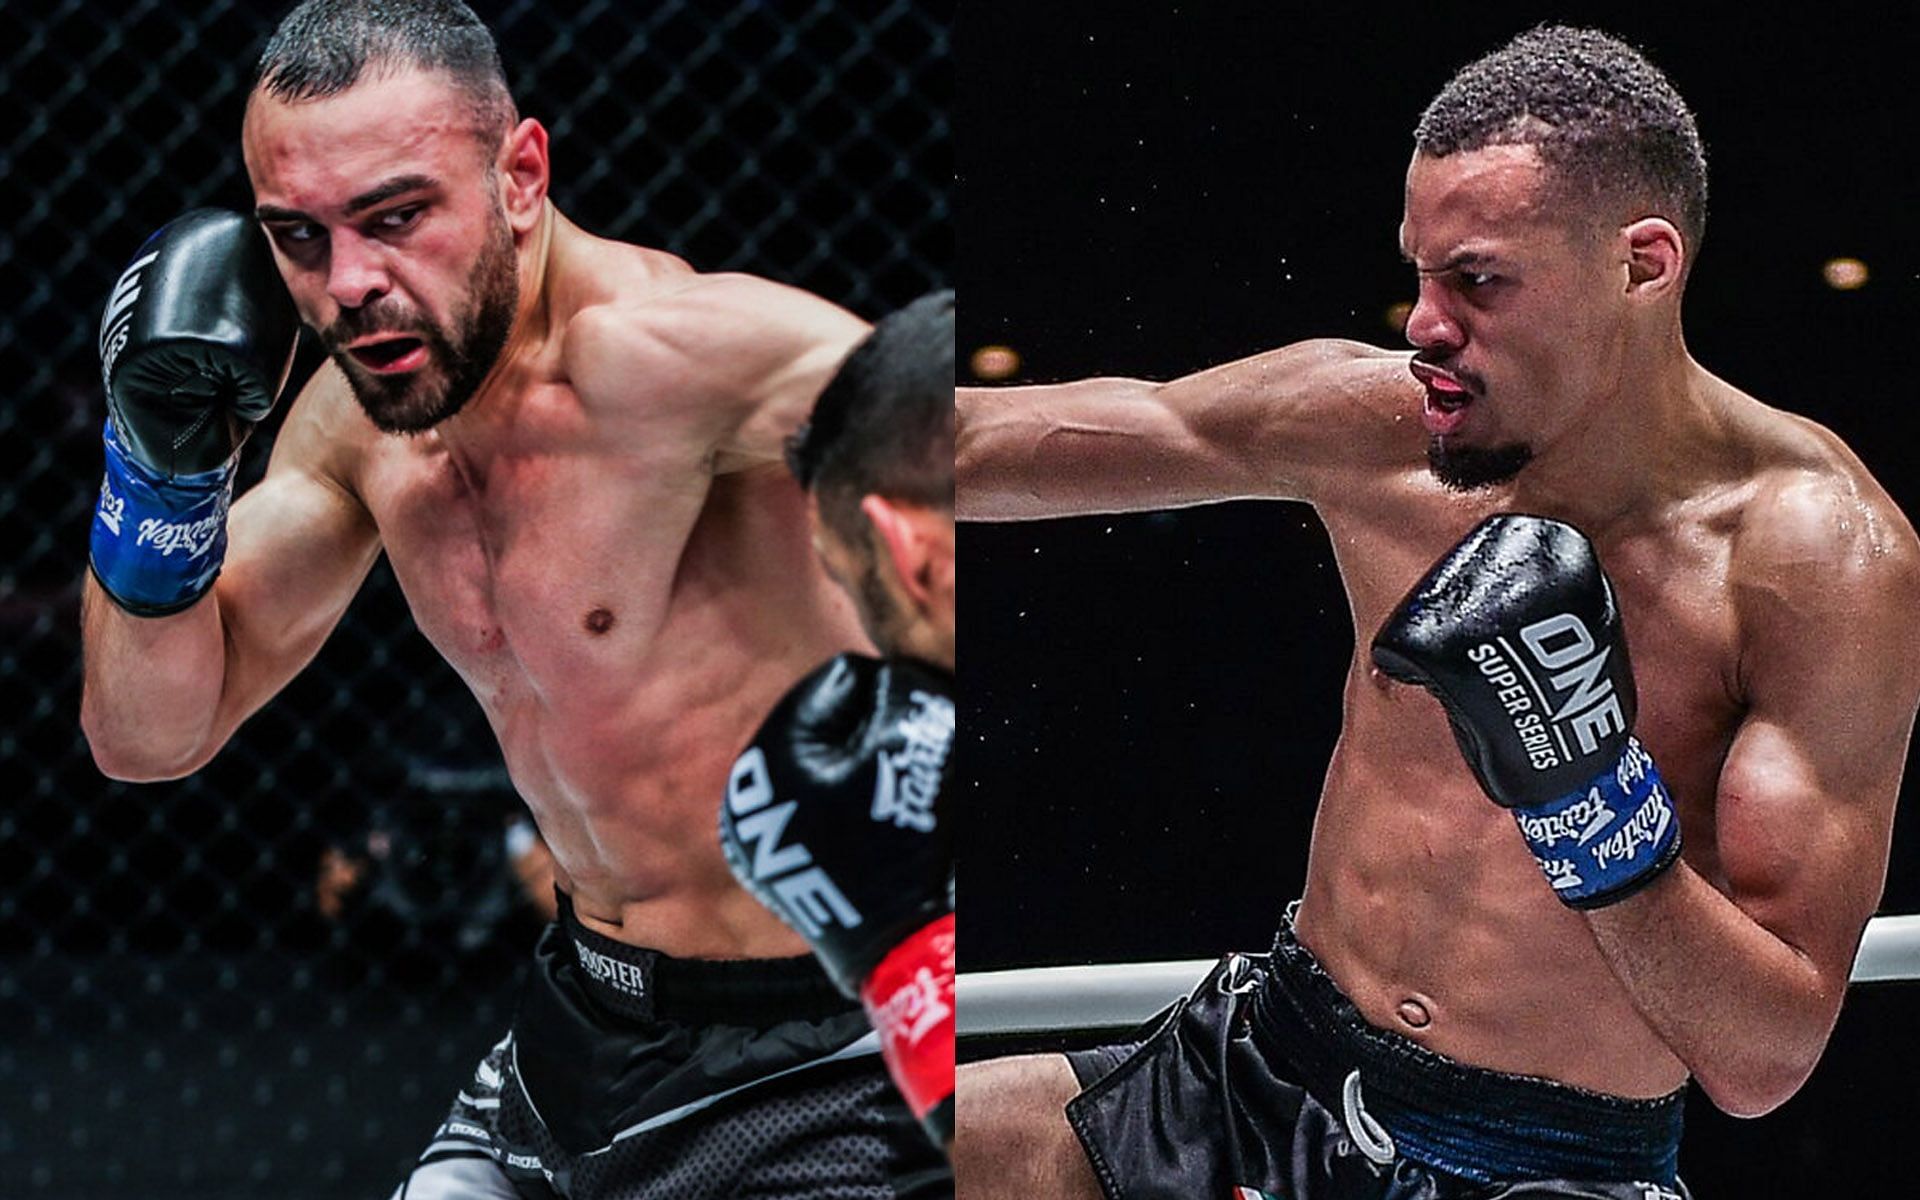 Regian Eersel (Right) will defend his world title against Arian Sadikovic at ONE: Reloaded. | [Photos: ONE Championship]